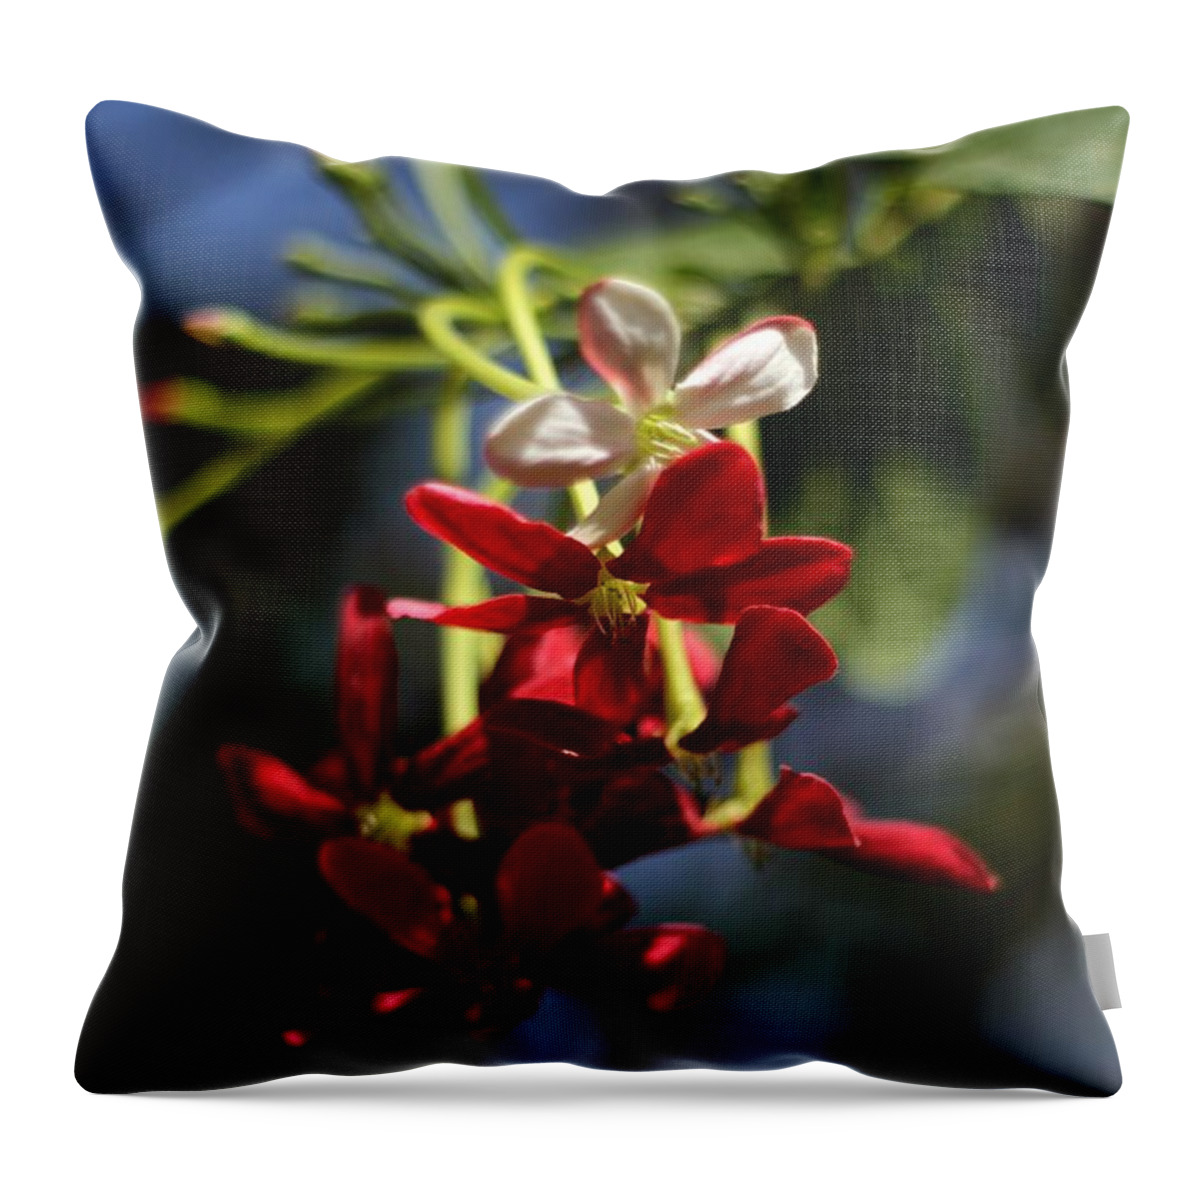 Red Flower Throw Pillow featuring the photograph Red Jasmine Blossom by Ramabhadran Thirupattur